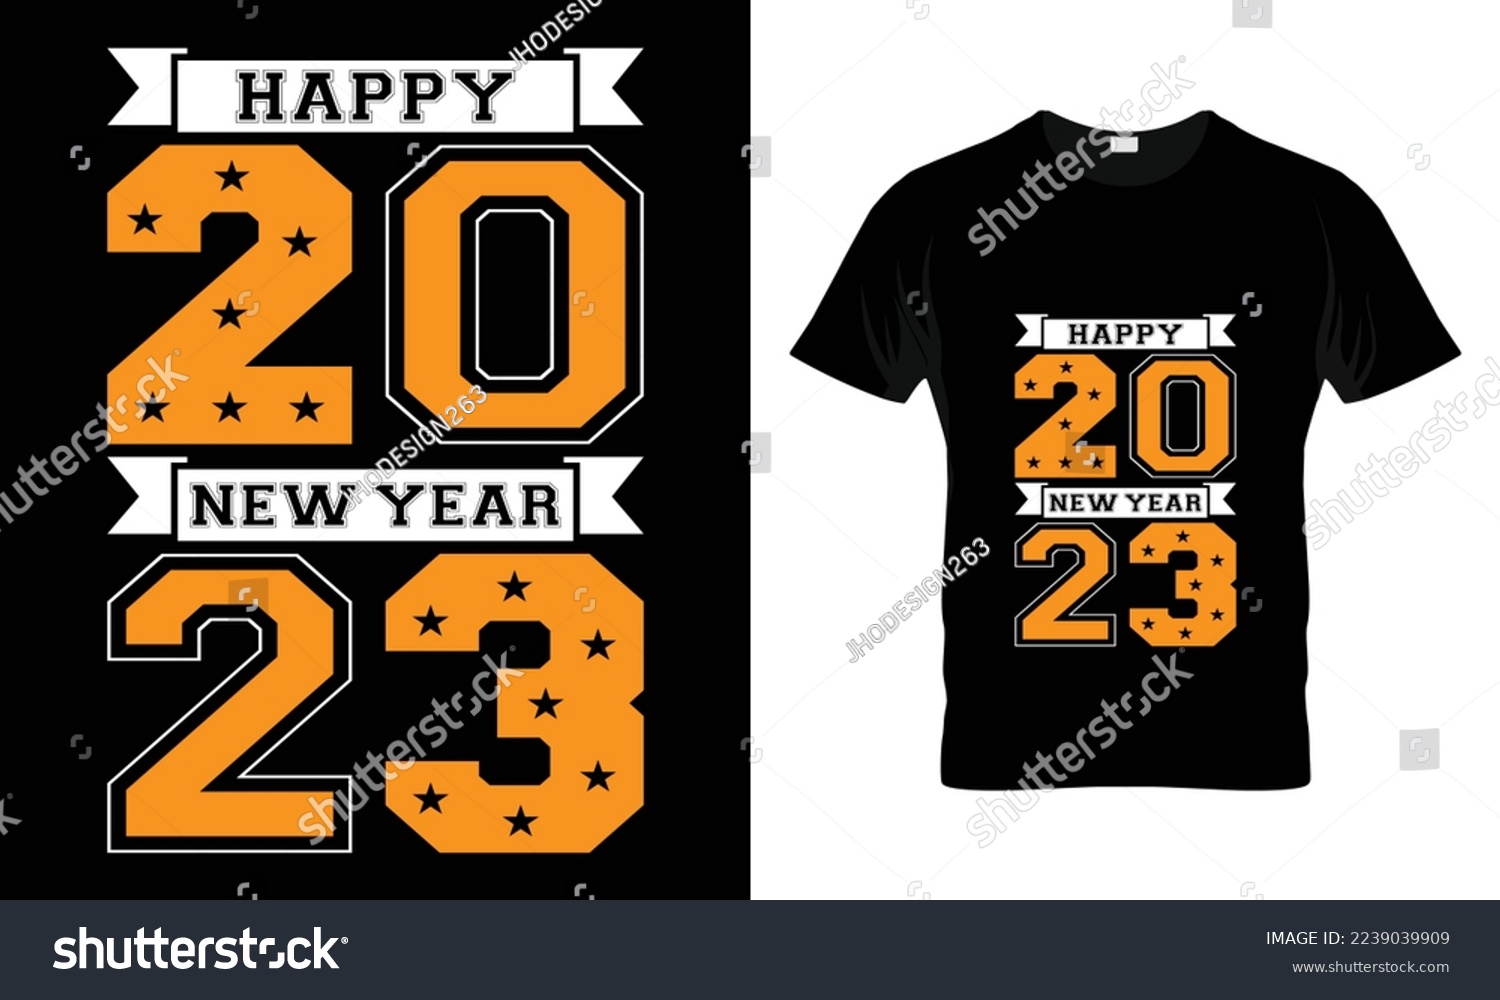 SVG of Happy new year 2023 design template vector and typography.
Ready for t-shirt, mug, gift and other printing,2023 Svg design, New Year Stickers quotes t shirt Designs.

 svg